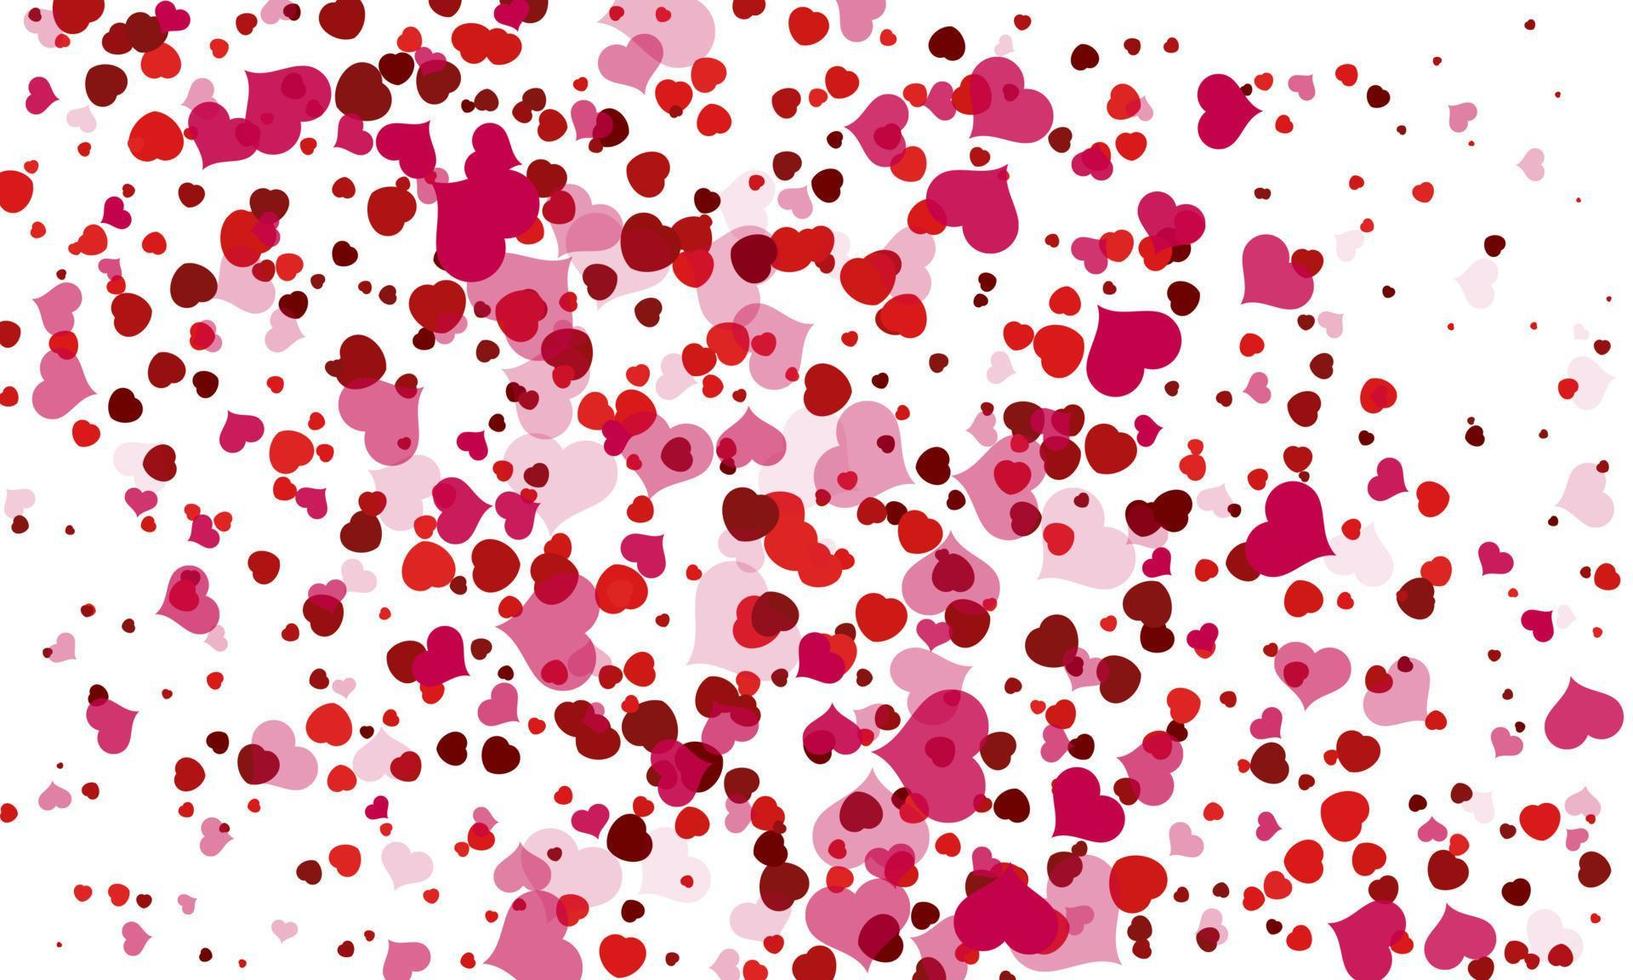 Happy Valentines Day Background. Abstract hearts for Valentines Day Background Design. Vector illustration.